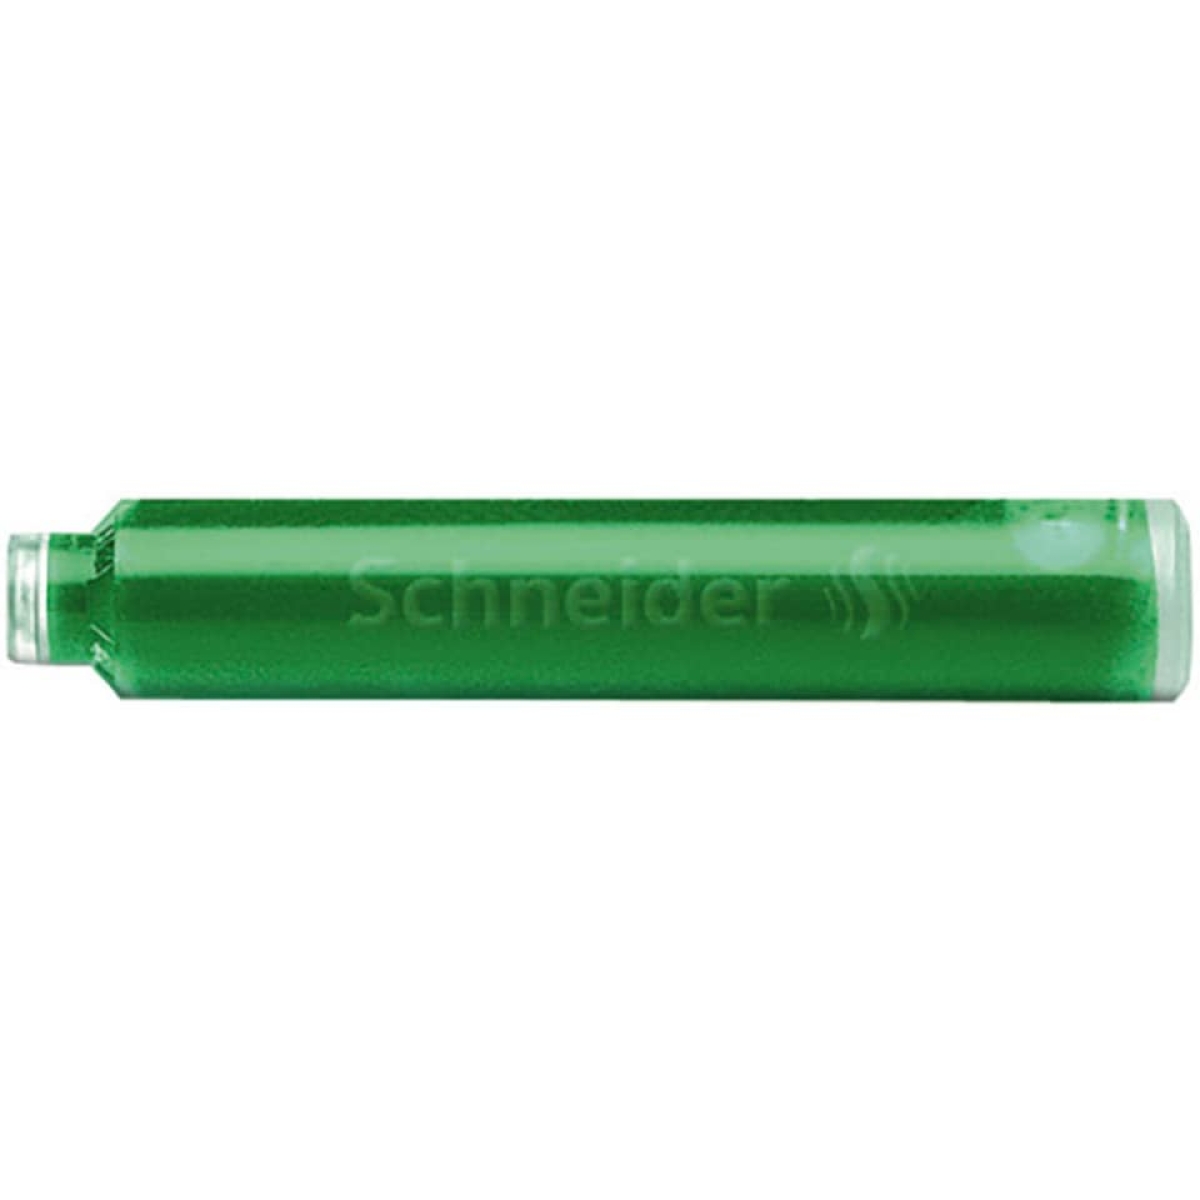 SCHNEIDERStandard ink cartridge for fountain pens, green, box of 6 SN6604-Price for 6 pcs.Article-No: 4004675066046